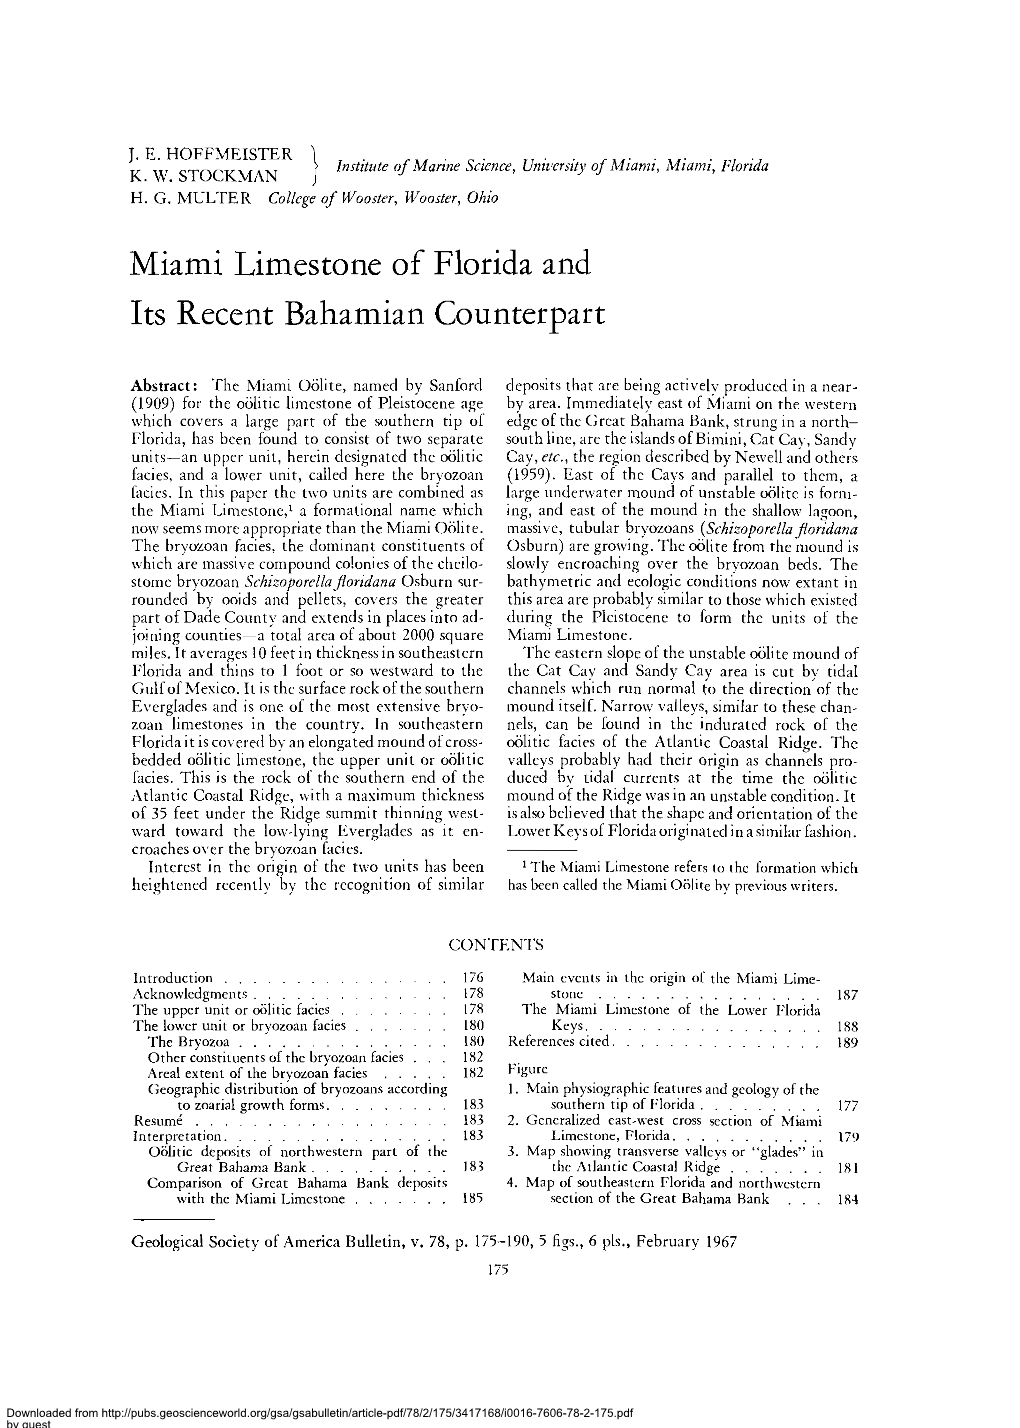 Pdf/78/2/175/3417168/I0016-7606-78-2-175.Pdf by Guest on 26 September 2021 176 HOFFMEISTER and OTHERS—MIAMI LIMESTONE, FLORIDA